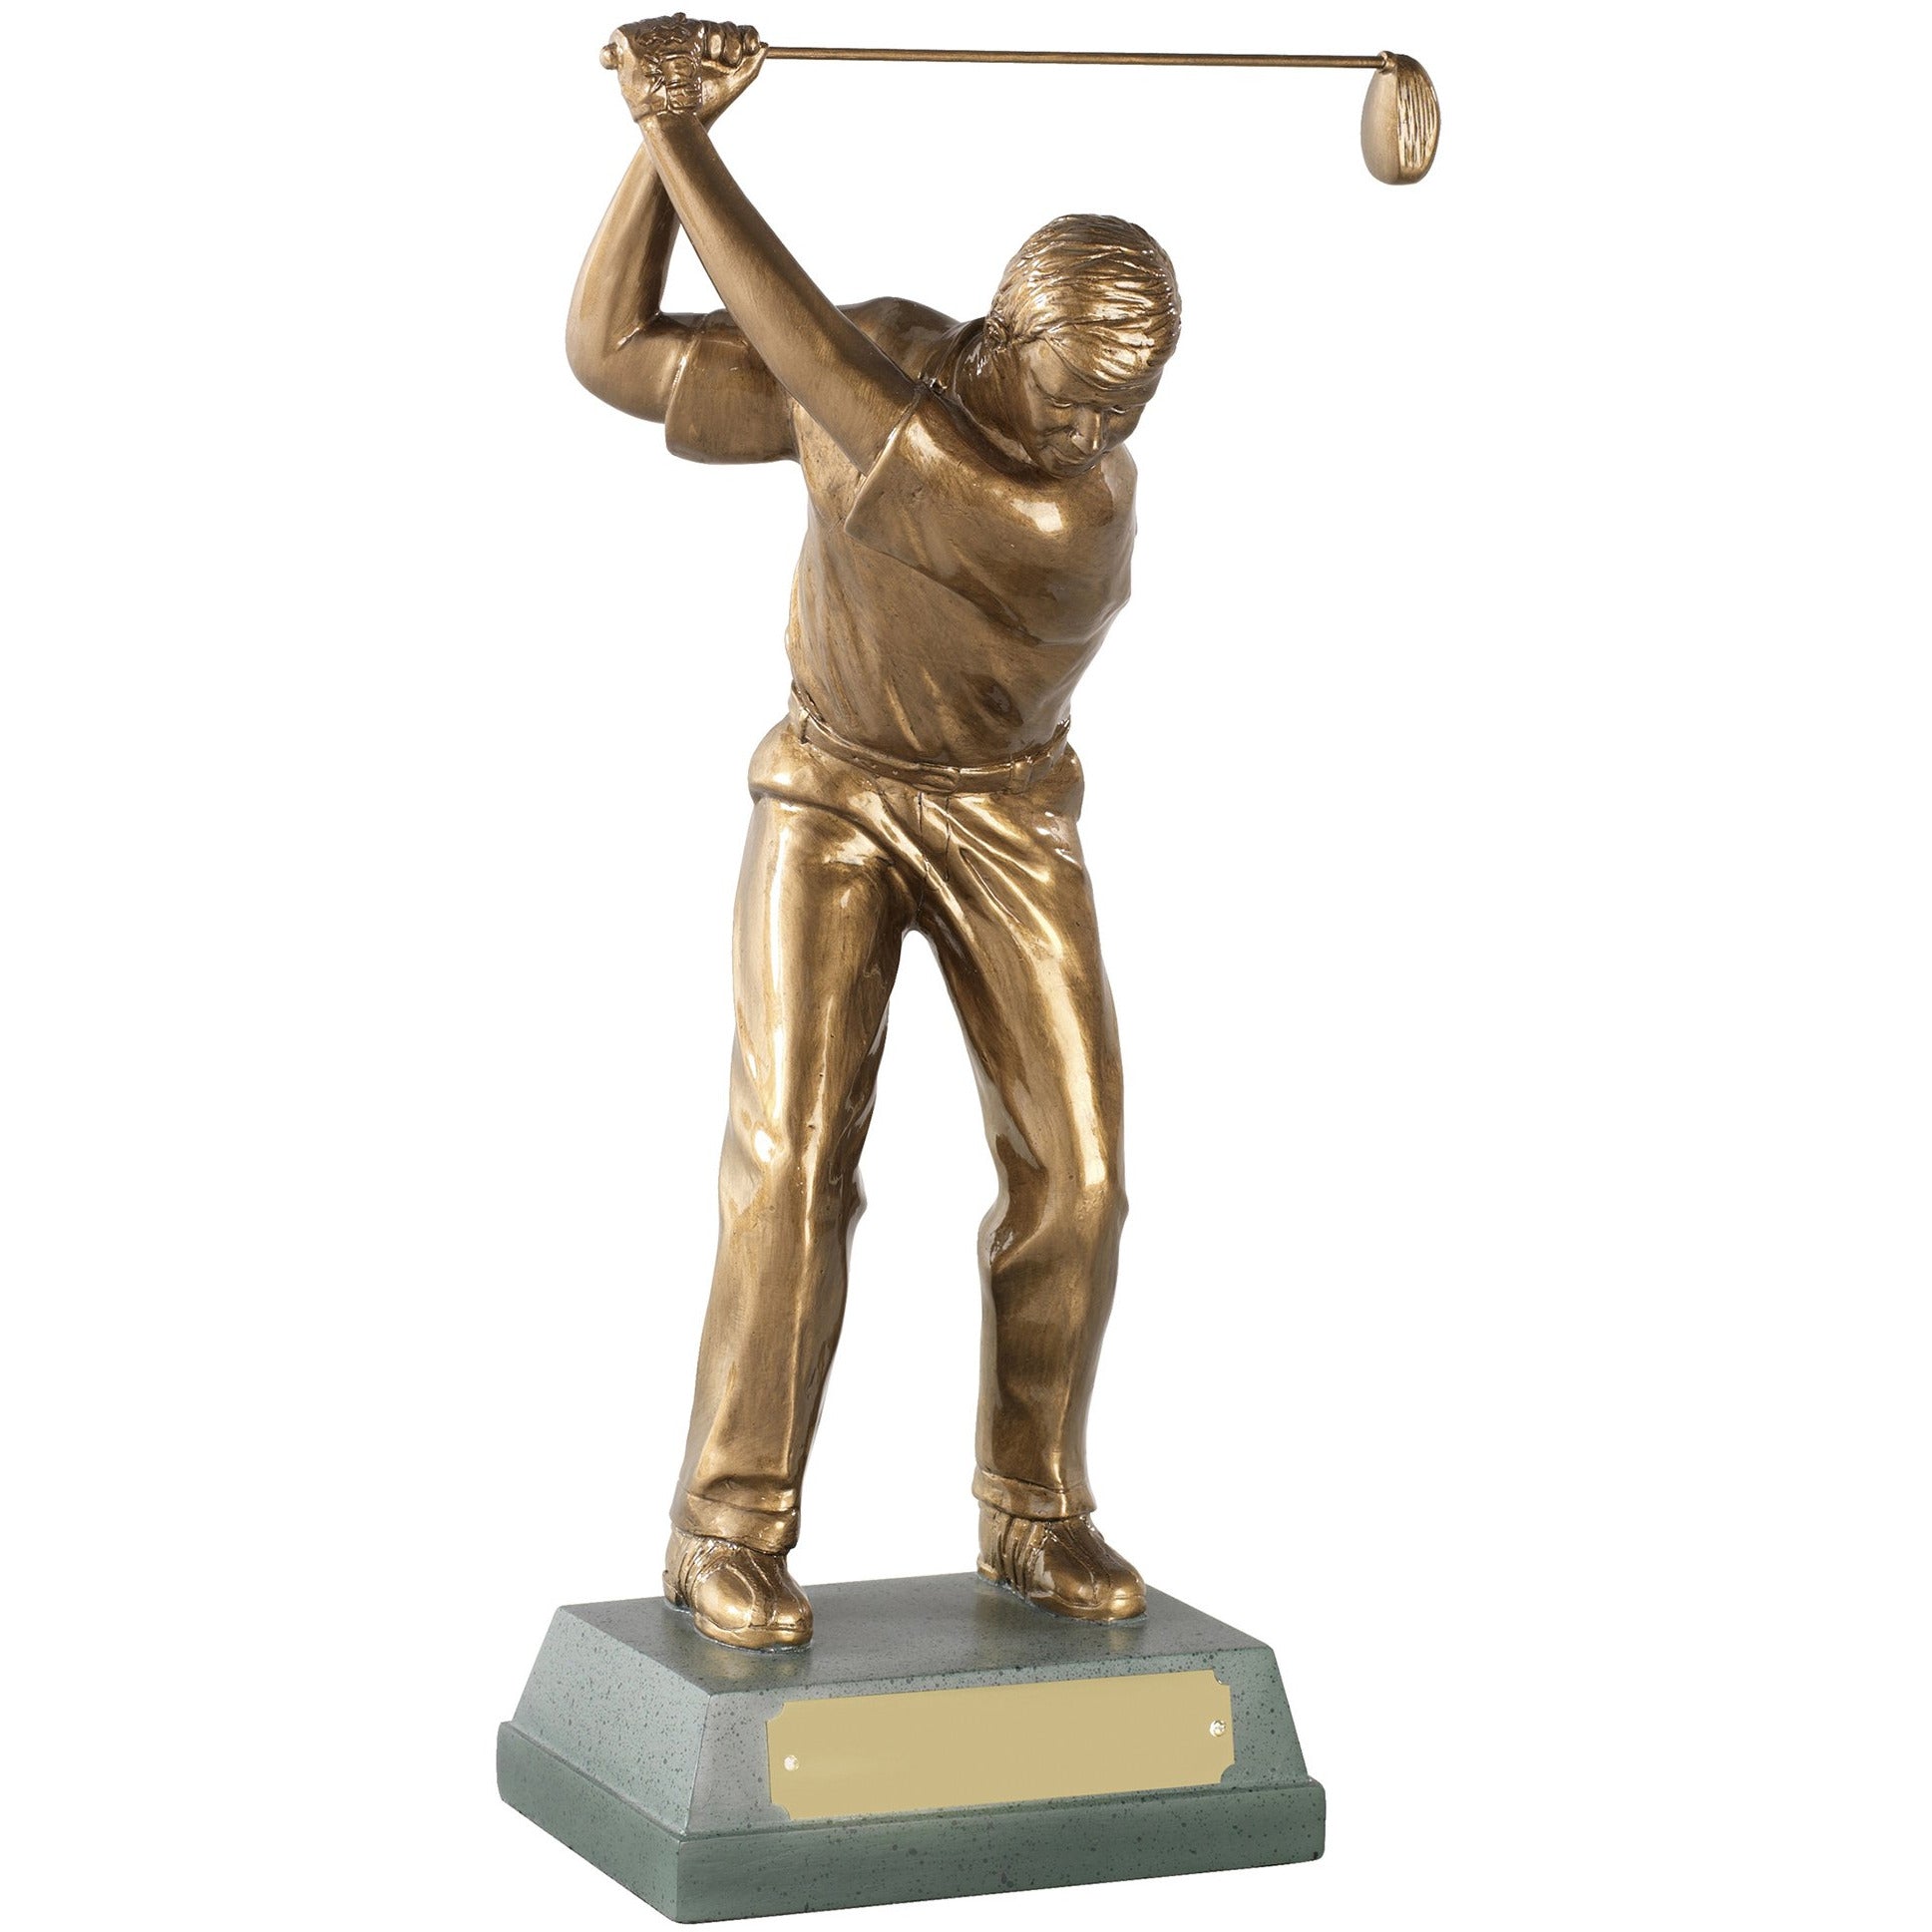 The Golf Master Statue - 36 Inch Tall! Limited Edition Trophy